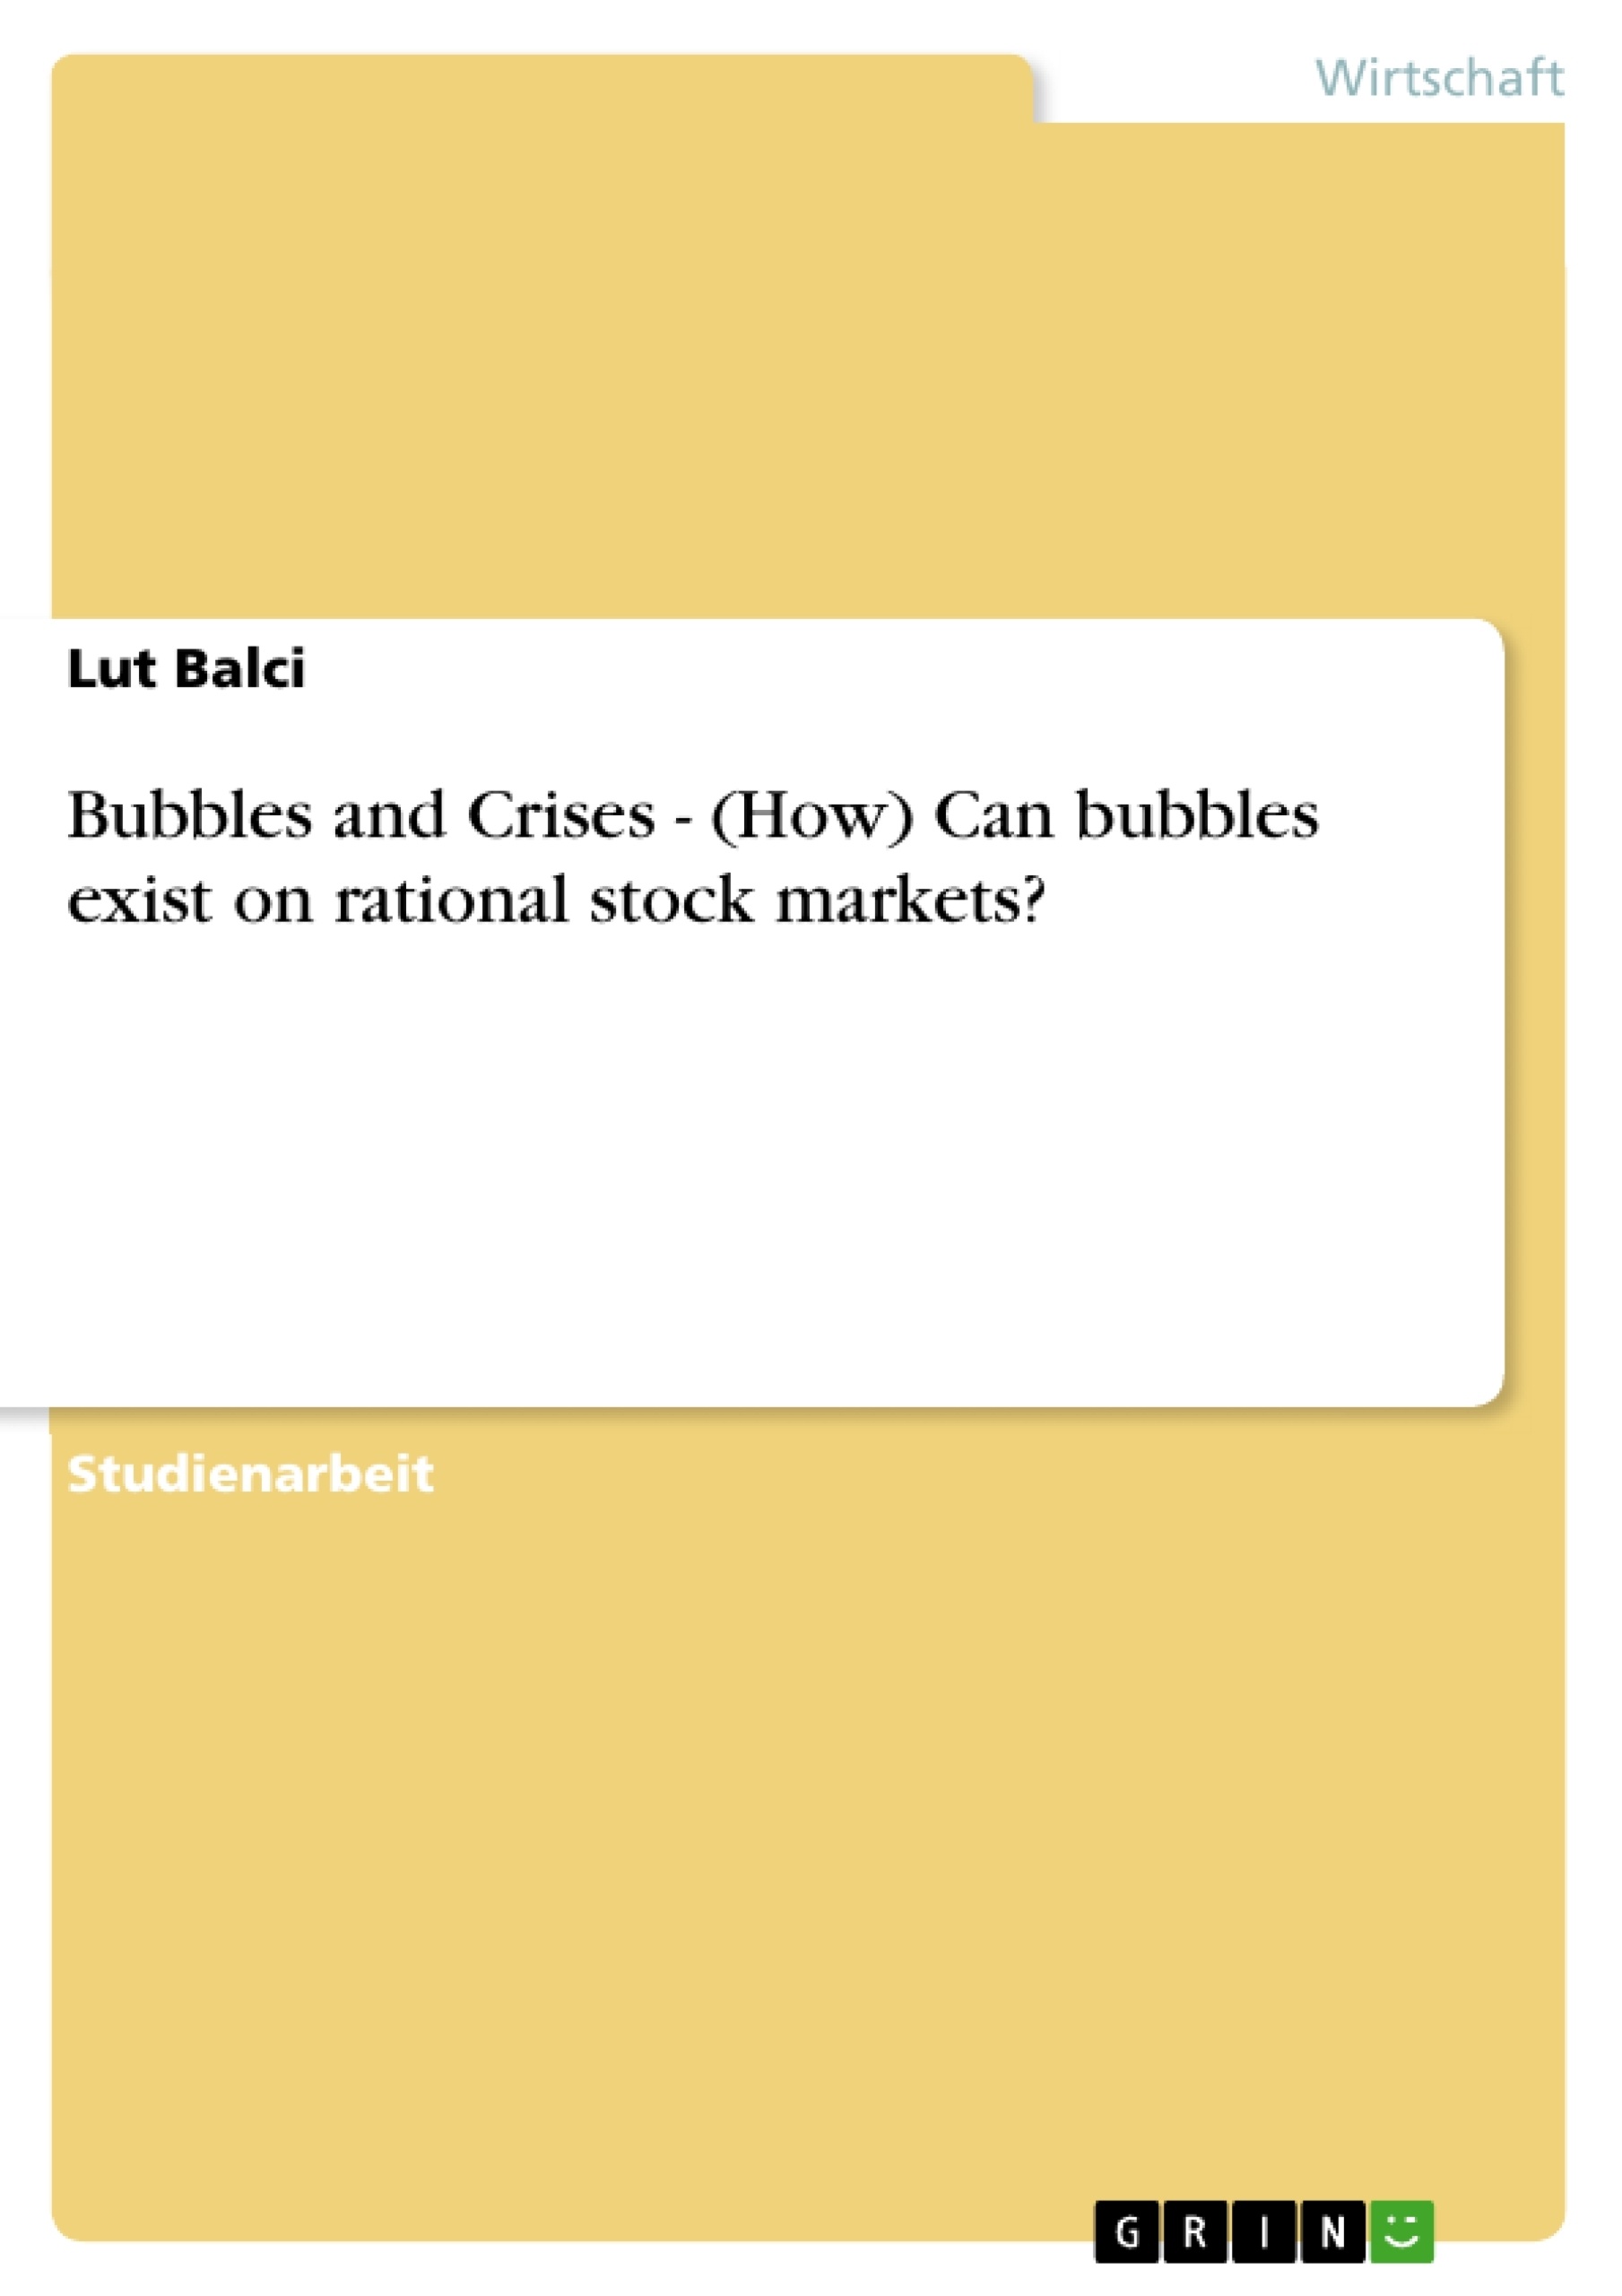 Titel: Bubbles and Crises - (How) Can bubbles exist on rational stock markets?